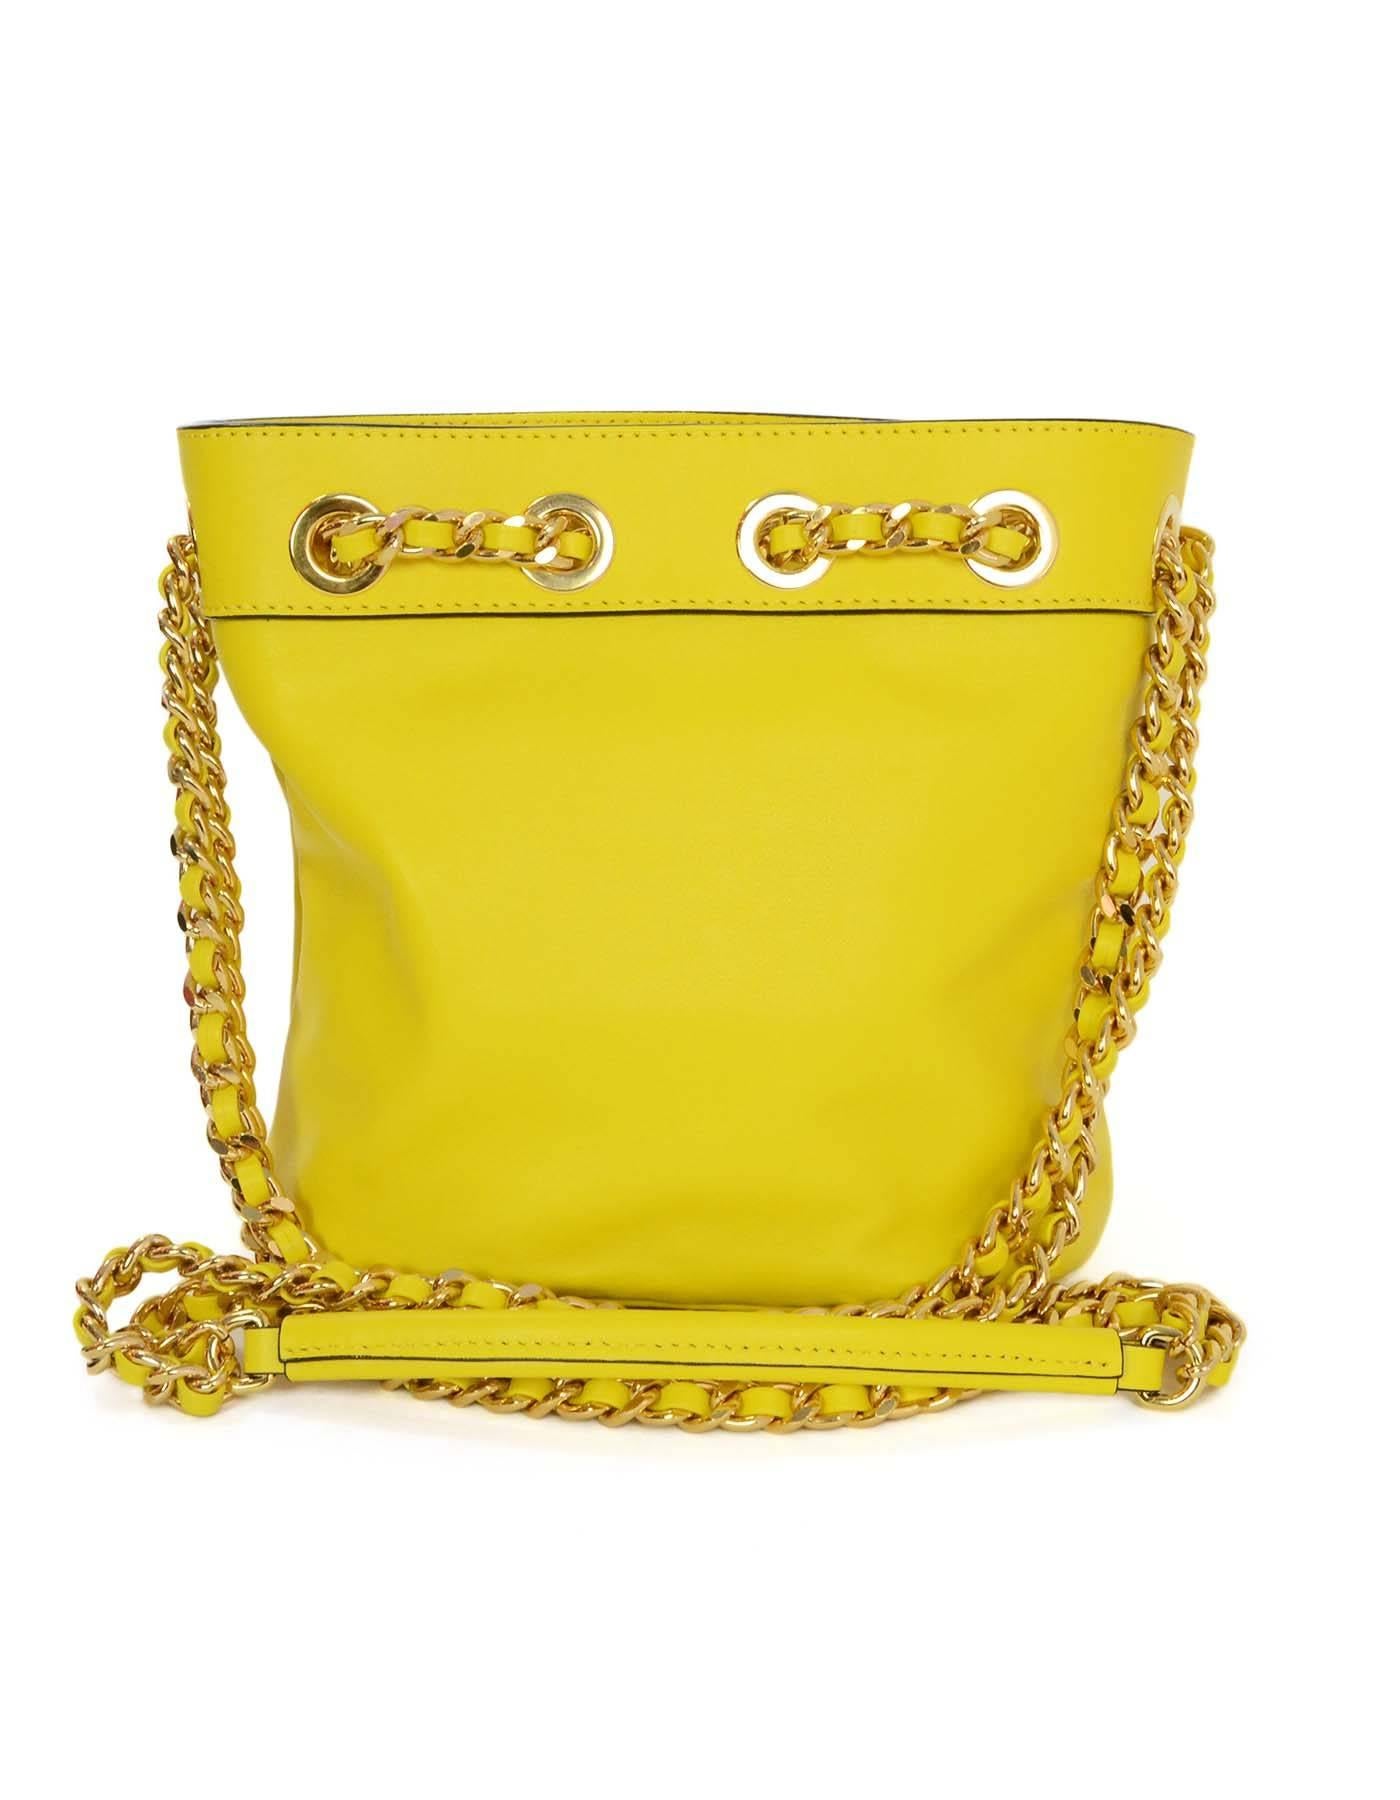 Moschino SOLD OUT Yellow Charm Bucket Crossbody Bag GHW In Excellent Condition In New York, NY